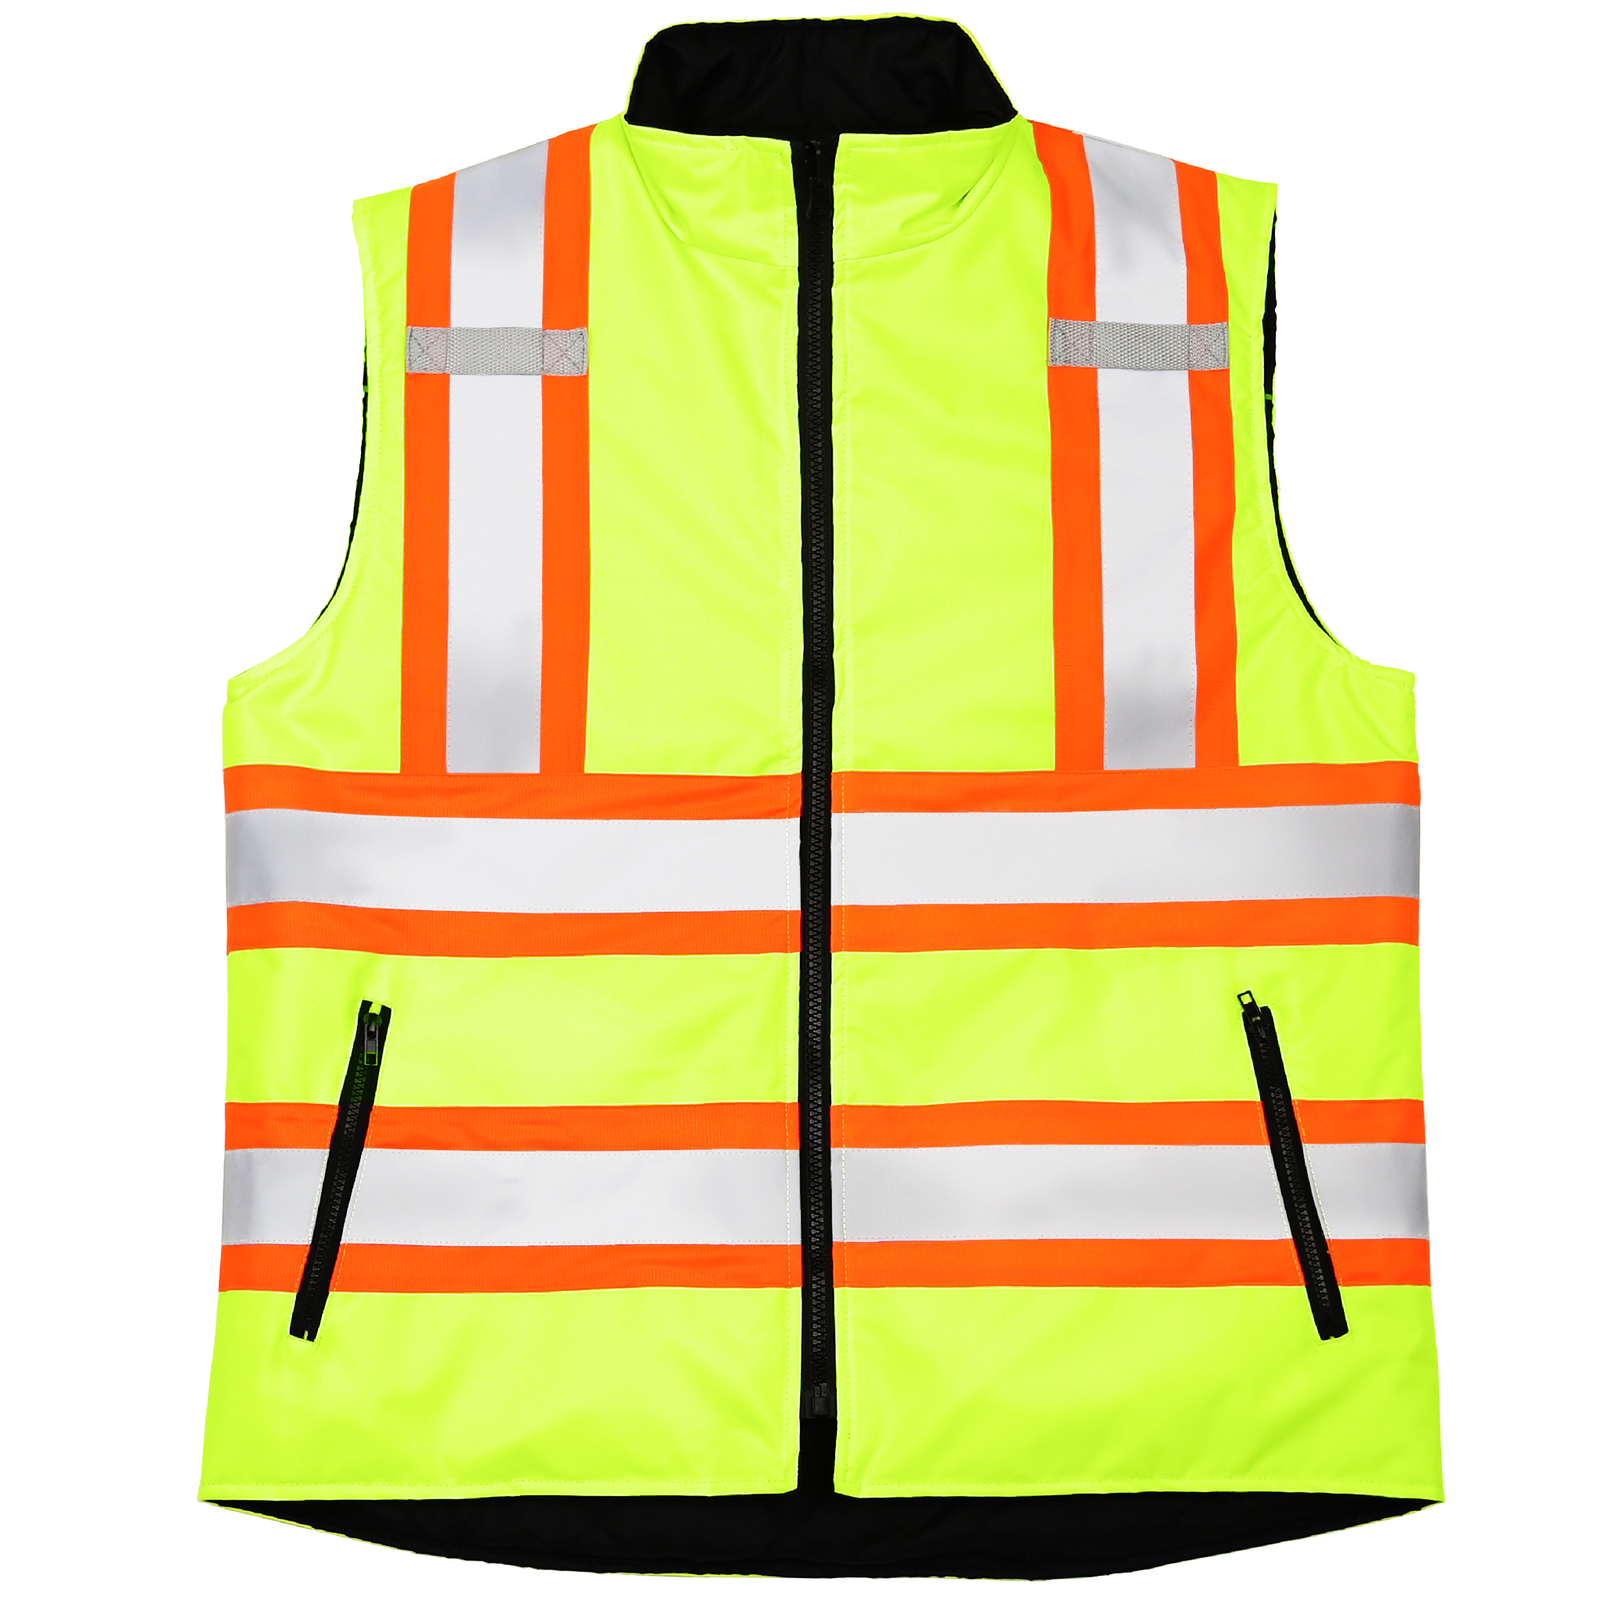 Front view of the yellow JORESTECH vi-vis X on back reversible insulated safety vest with reflective strips for road work